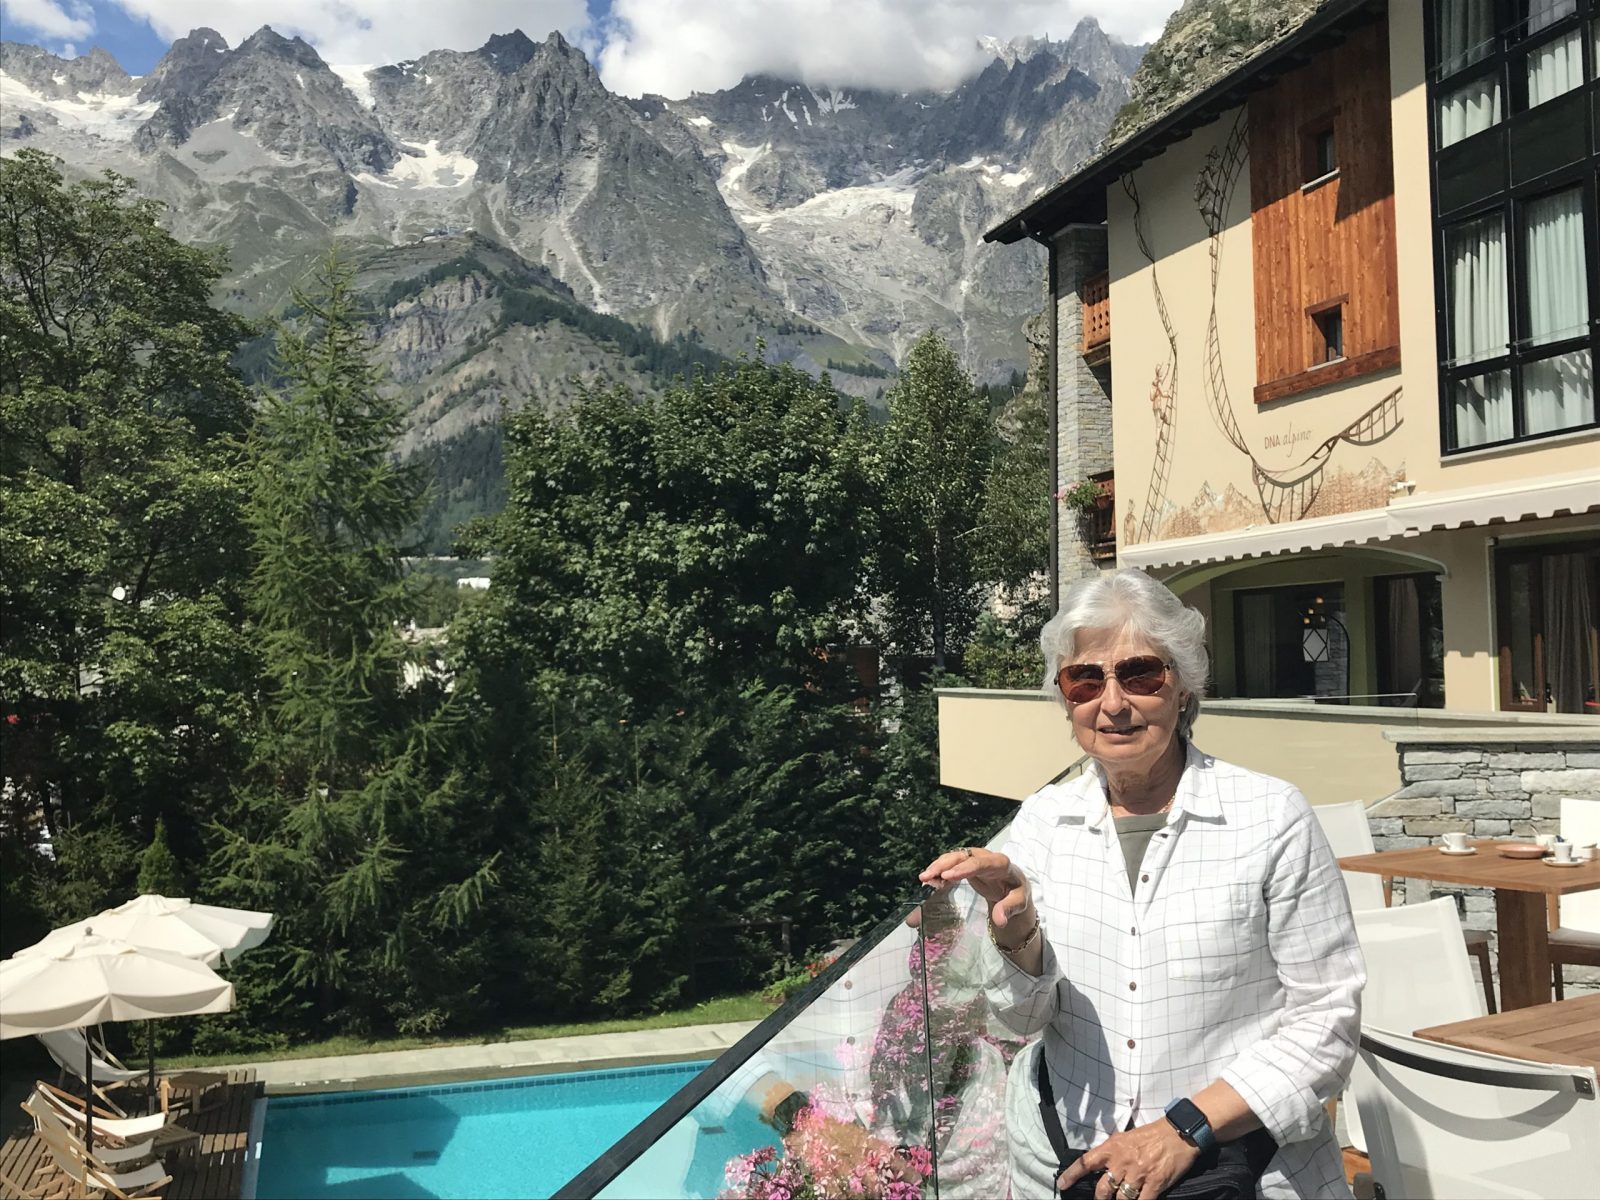 Enjoying the sunny afternoon with the coffee and cake at the terrace of the Gran Baita. My experience of buying a home in the Italian Alps.